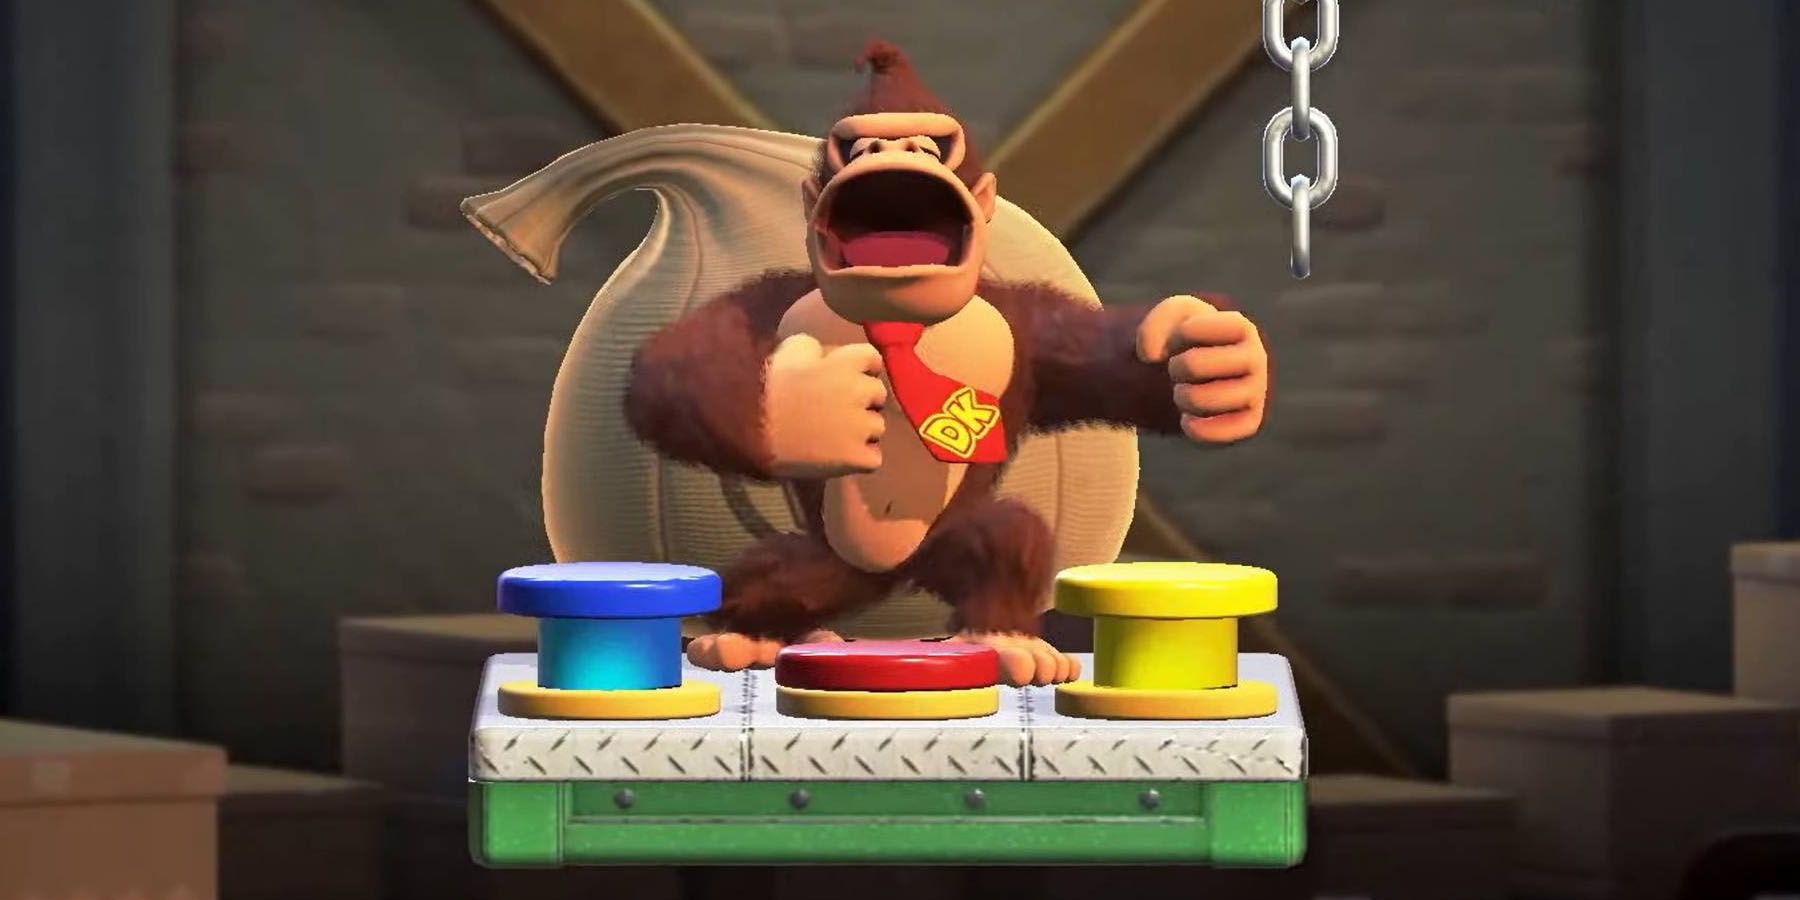 A screenshot of Donkey Kong standing in front of three multicolored buttons in Mario vs. Donkey Kong.